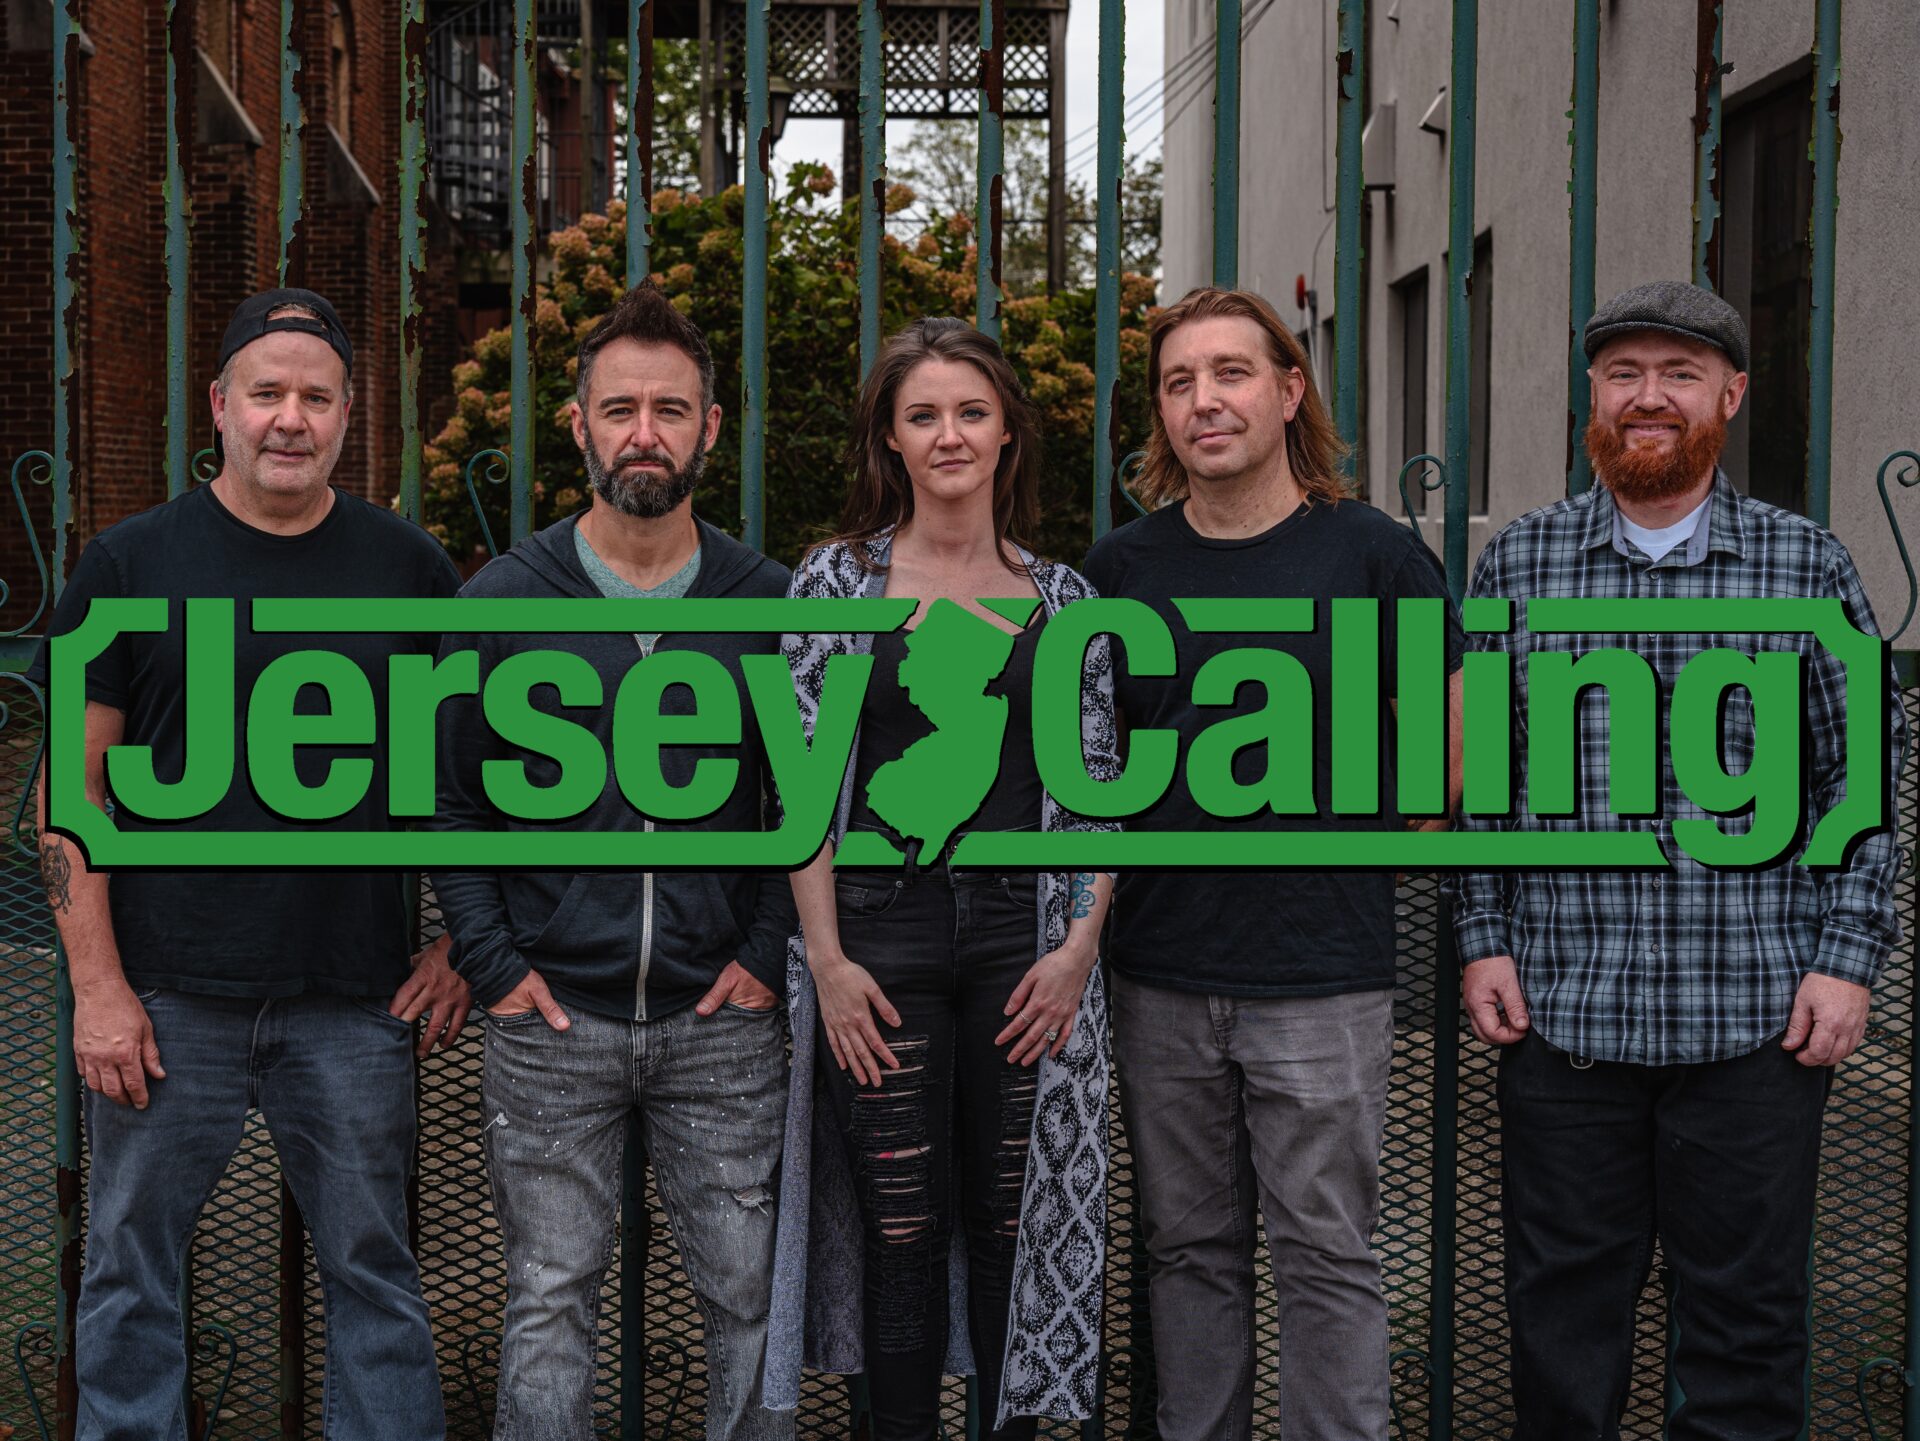 Parasocial Security by JERSEY CALLING: Album Review